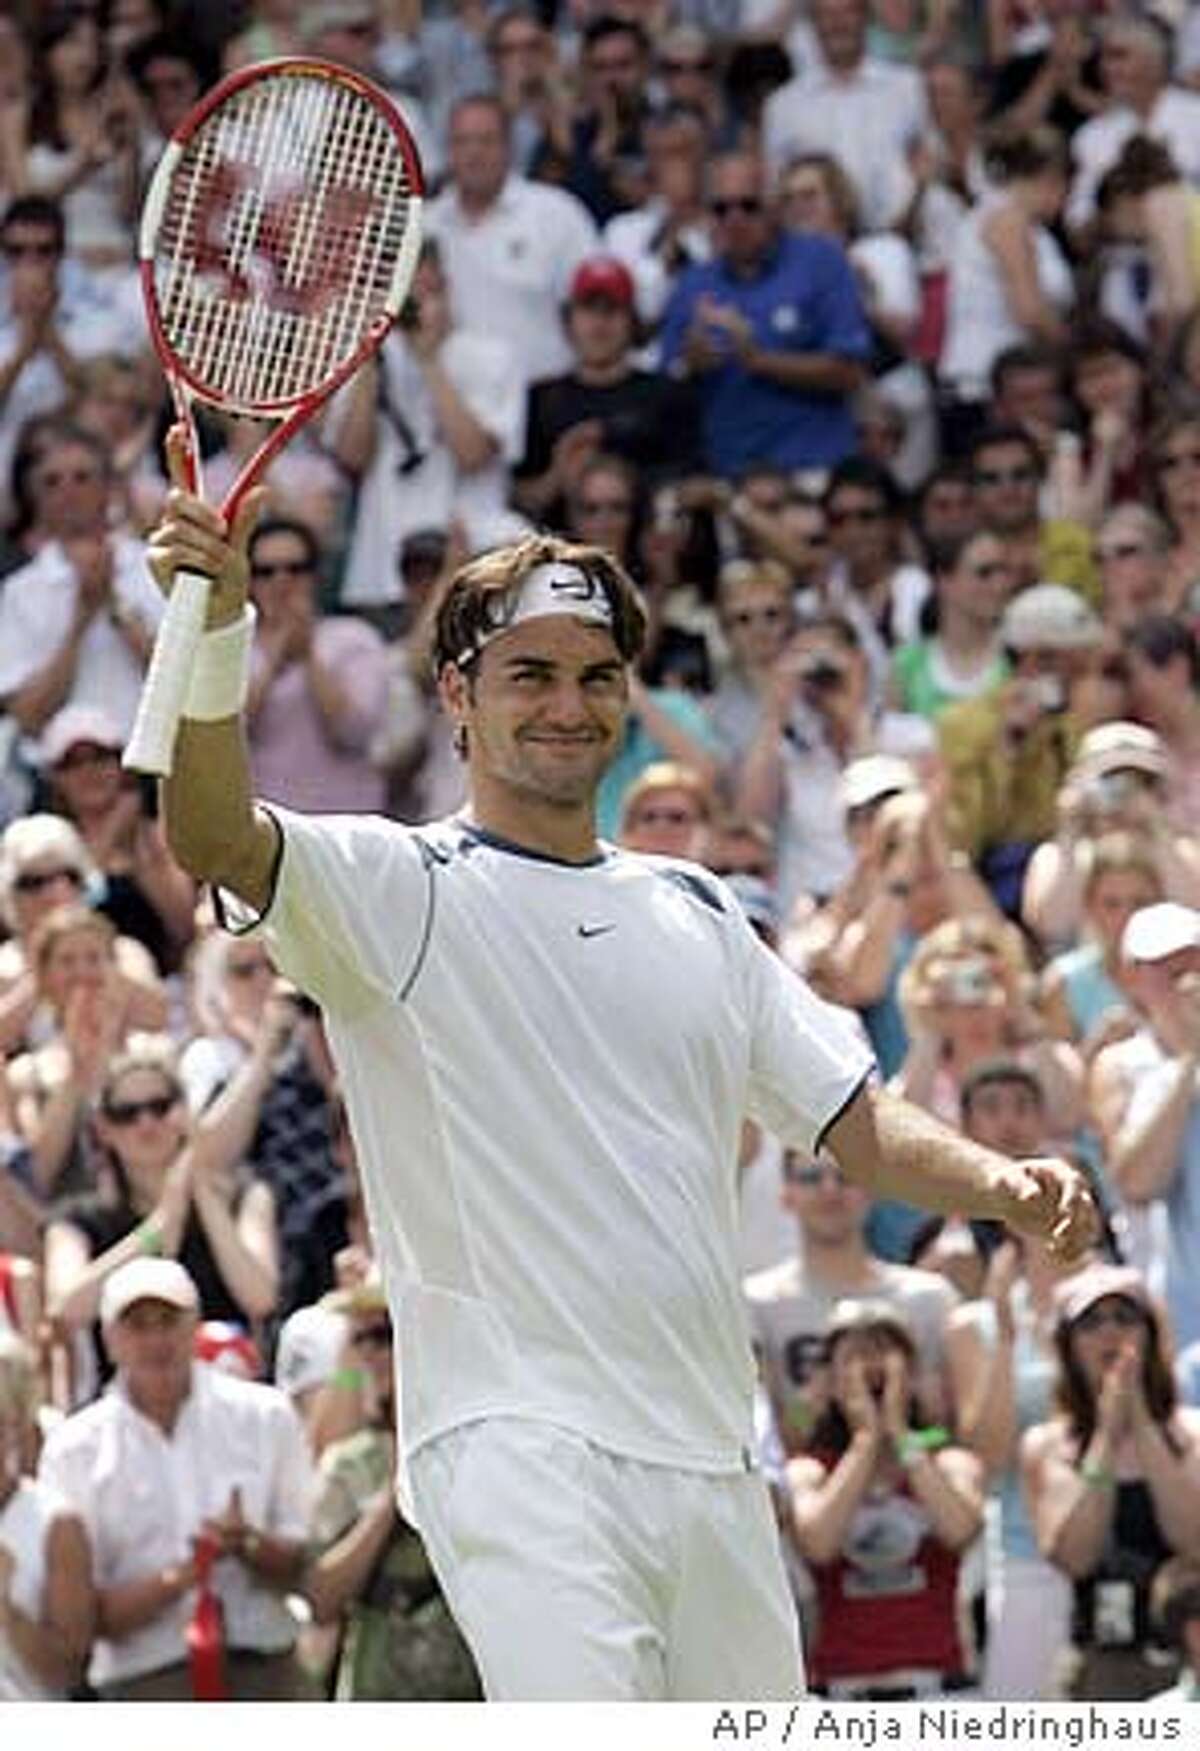 Switzerland's Roger Federer waves to the crowd after defeating France's Paul-Henri Mathieu during their first round match at the Wimbledon Championships in WImbledon Monday, June 20, 2005. (AP Photo/Anja Niedringhaus)